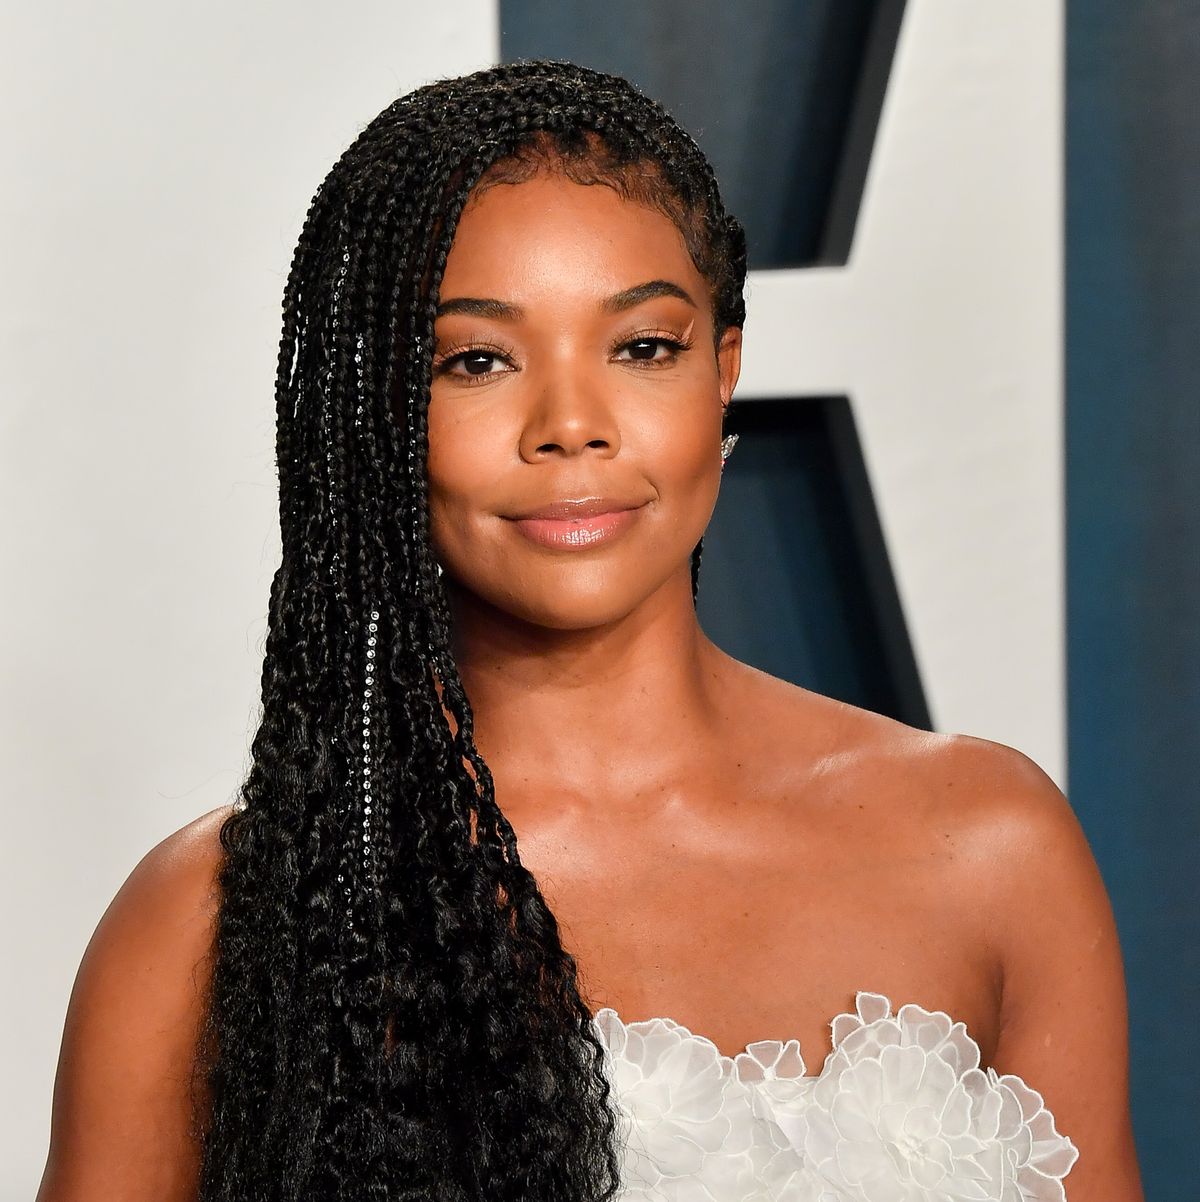 Gabrielle Union Shares Her Go To Acne Spot Treatment On Instagram